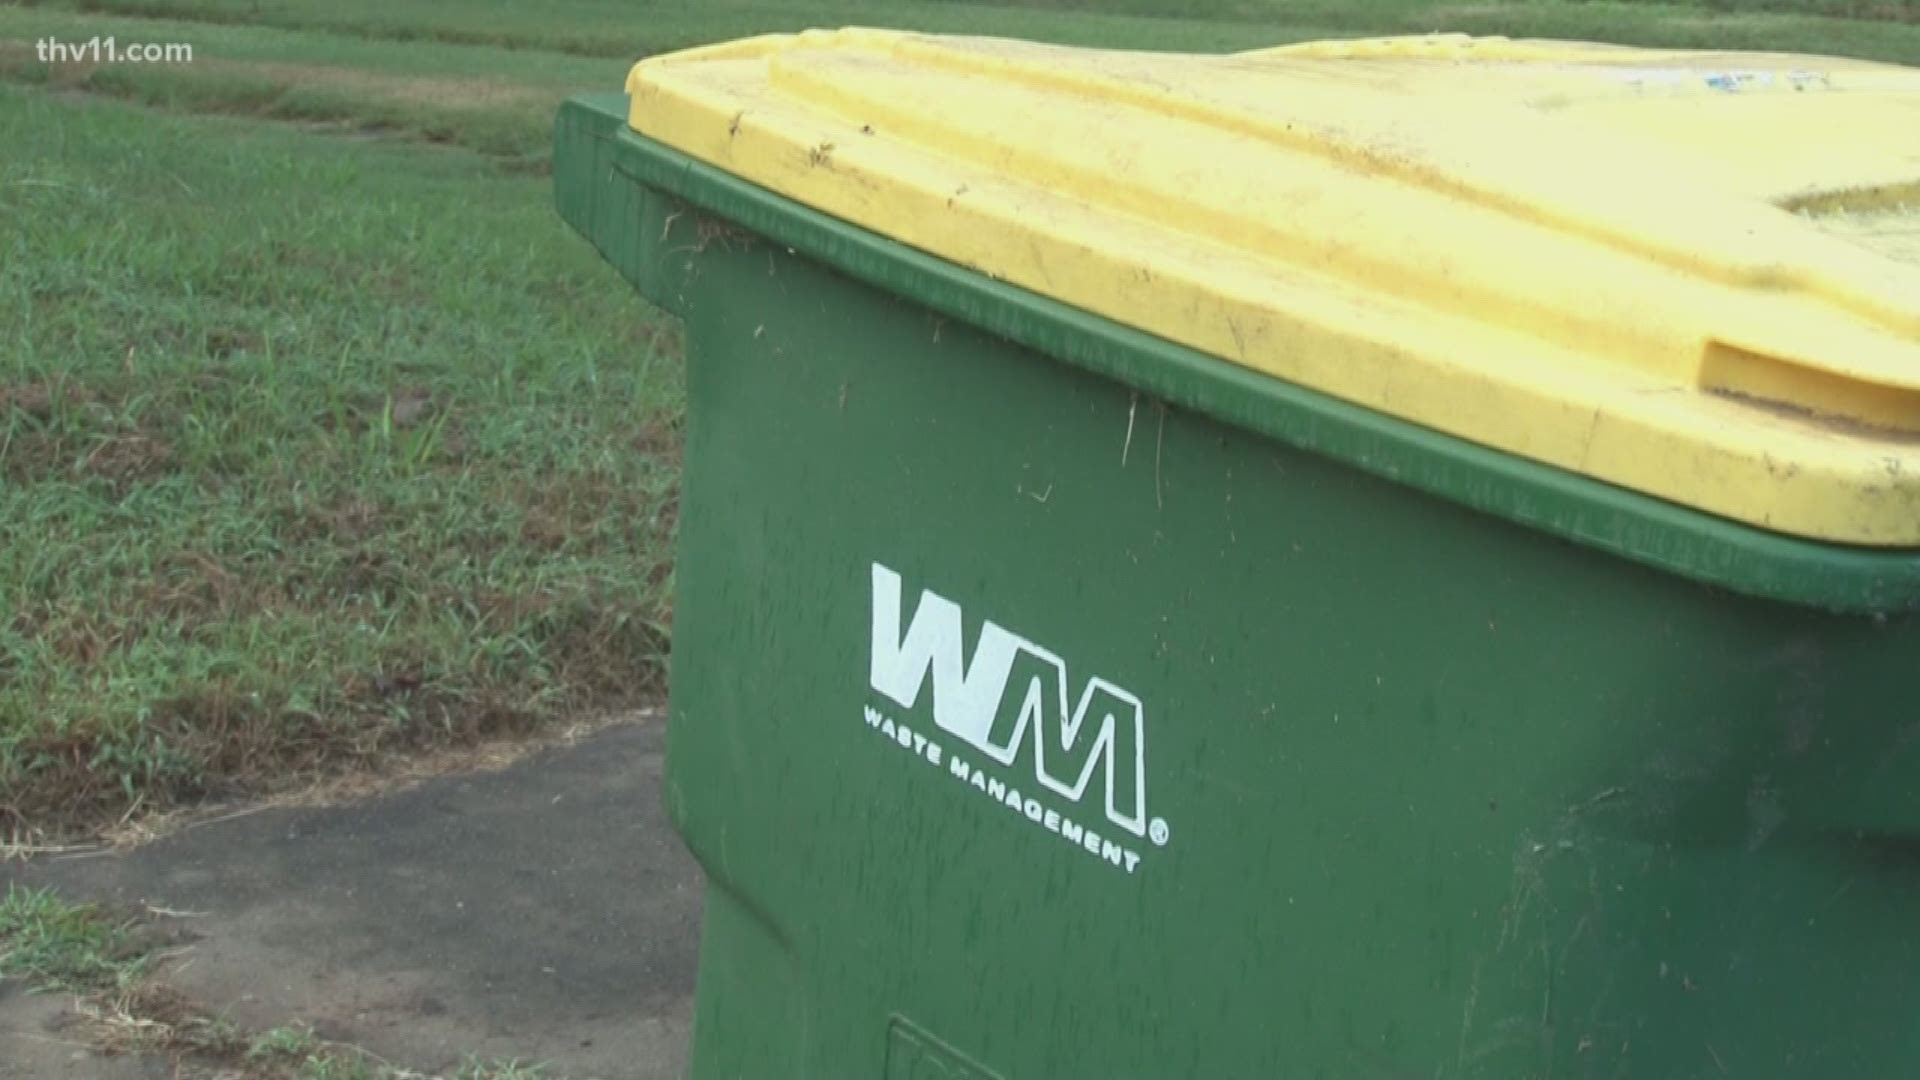 Glass and other recyclable materials will no longer be allowed in recycle bins in Pulaski County starting April 1.